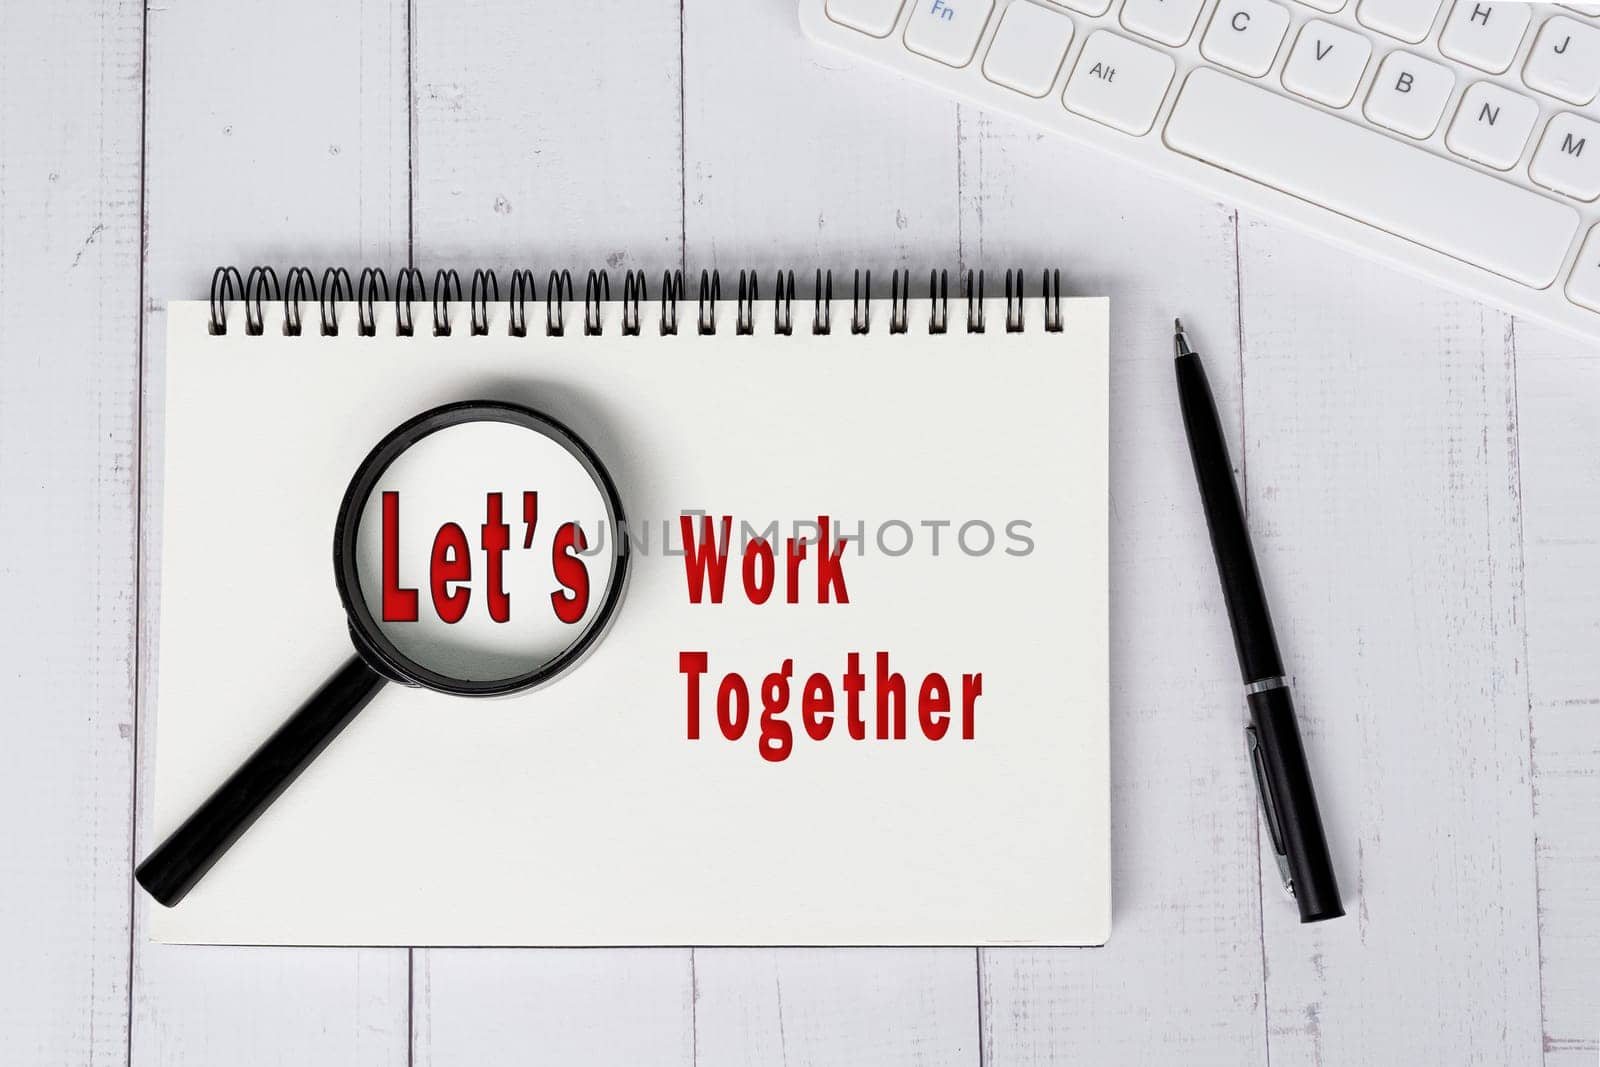 LET'S WORK TOGETHER text with magnify glass on note book on white wooden desk. Team work concept.